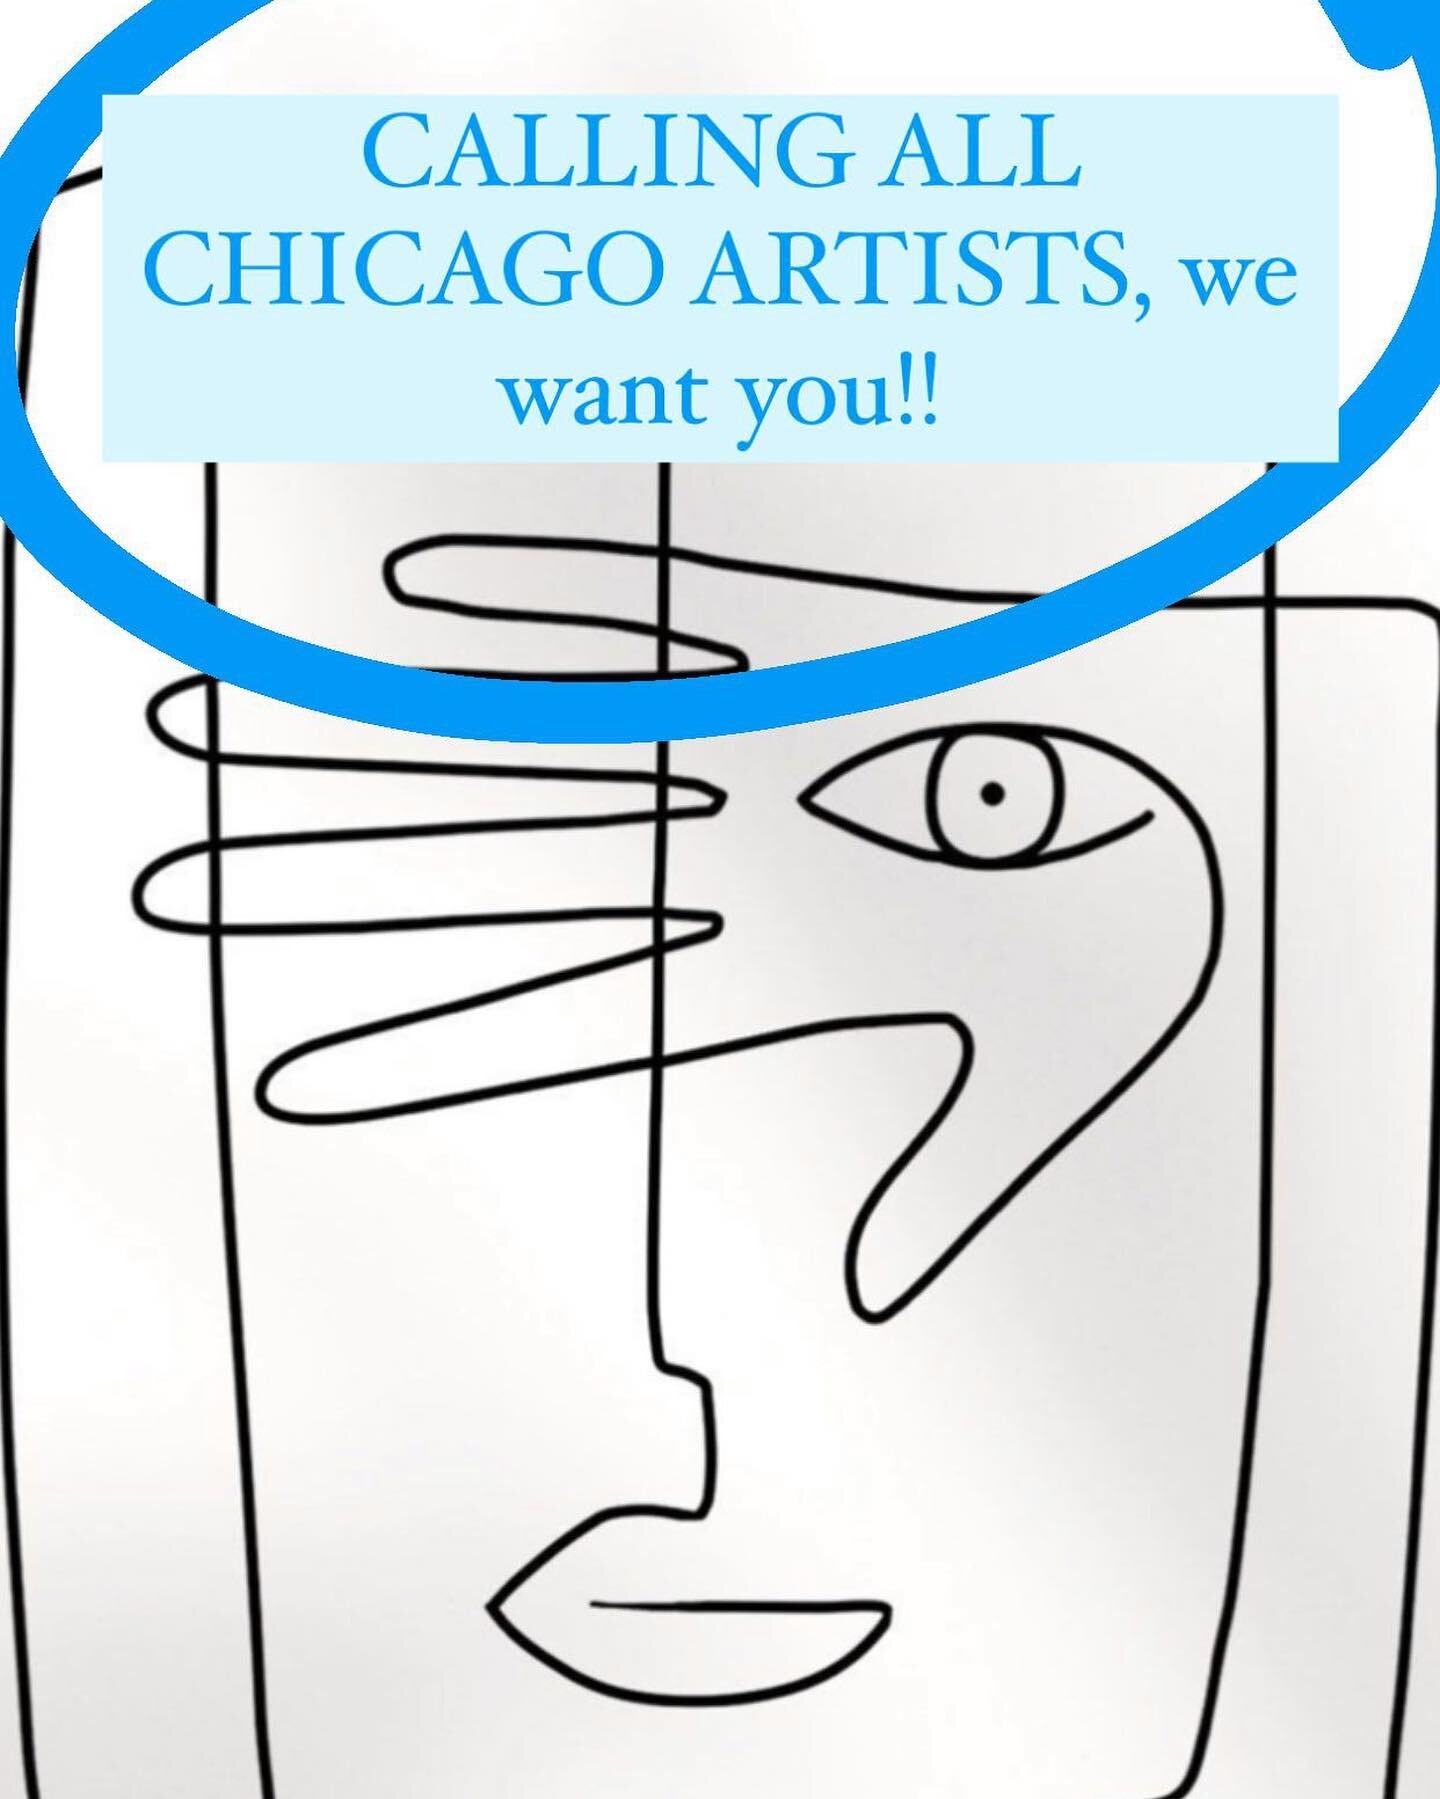 ✨CALLING ALL CHICAGO ARTIST✨

Check it out:
&bull; Enter our merch contest!
&bull; Do your thing, get weird, CREATE!
&bull; Your art will help create a circular economy. One that supports our nonprofit that uses comedy, improv, the arts and humor as 